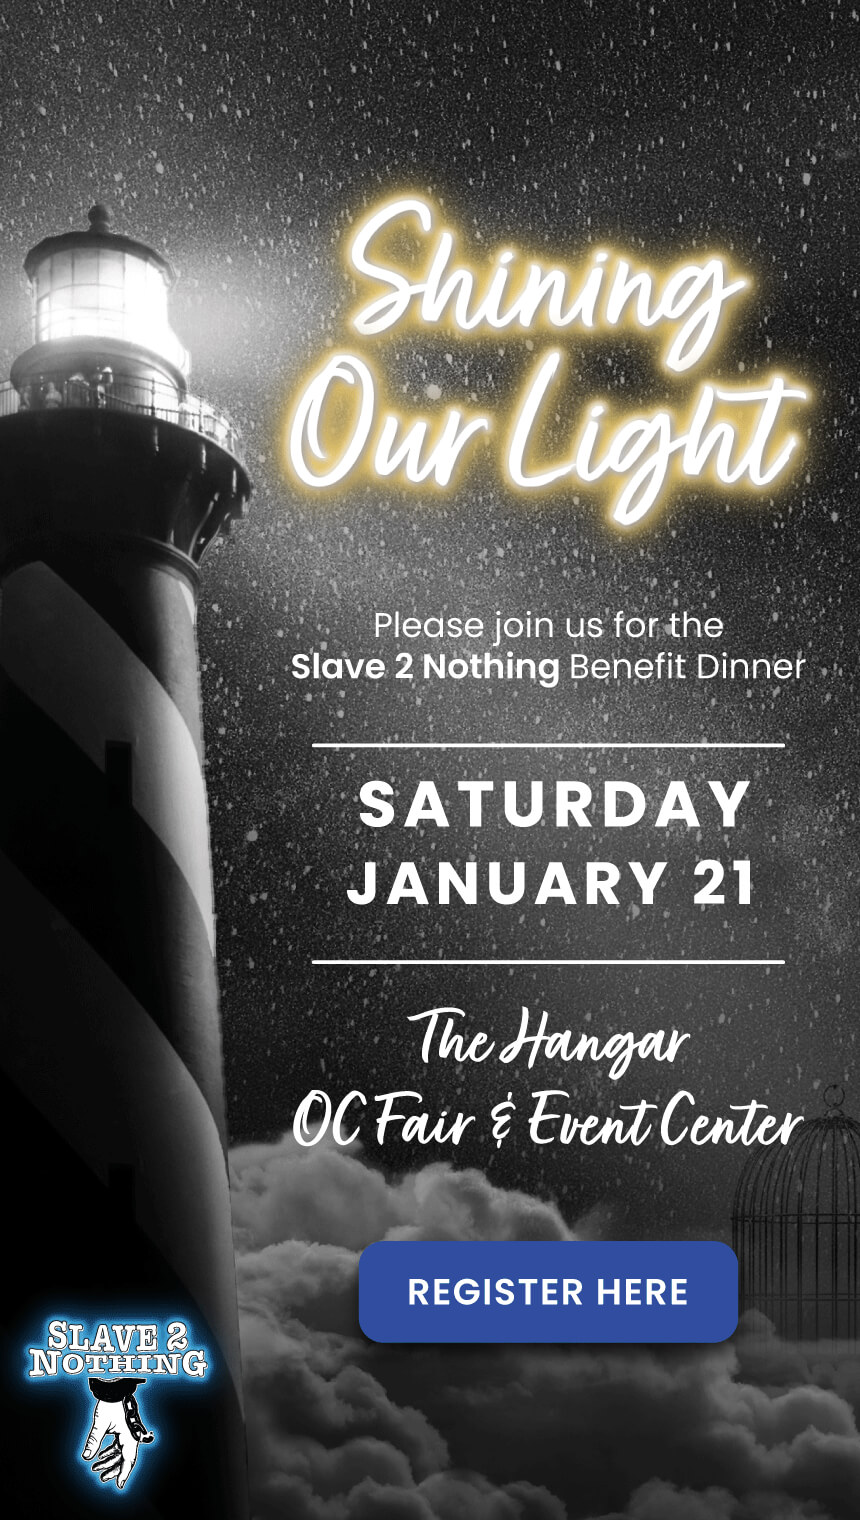 Shining Our Light.  Join us for the Slave 2 Nothing Benefit Dinner.  Saturday, January 21, 2023.  Located at the Hangar, OC Fair and Event Center